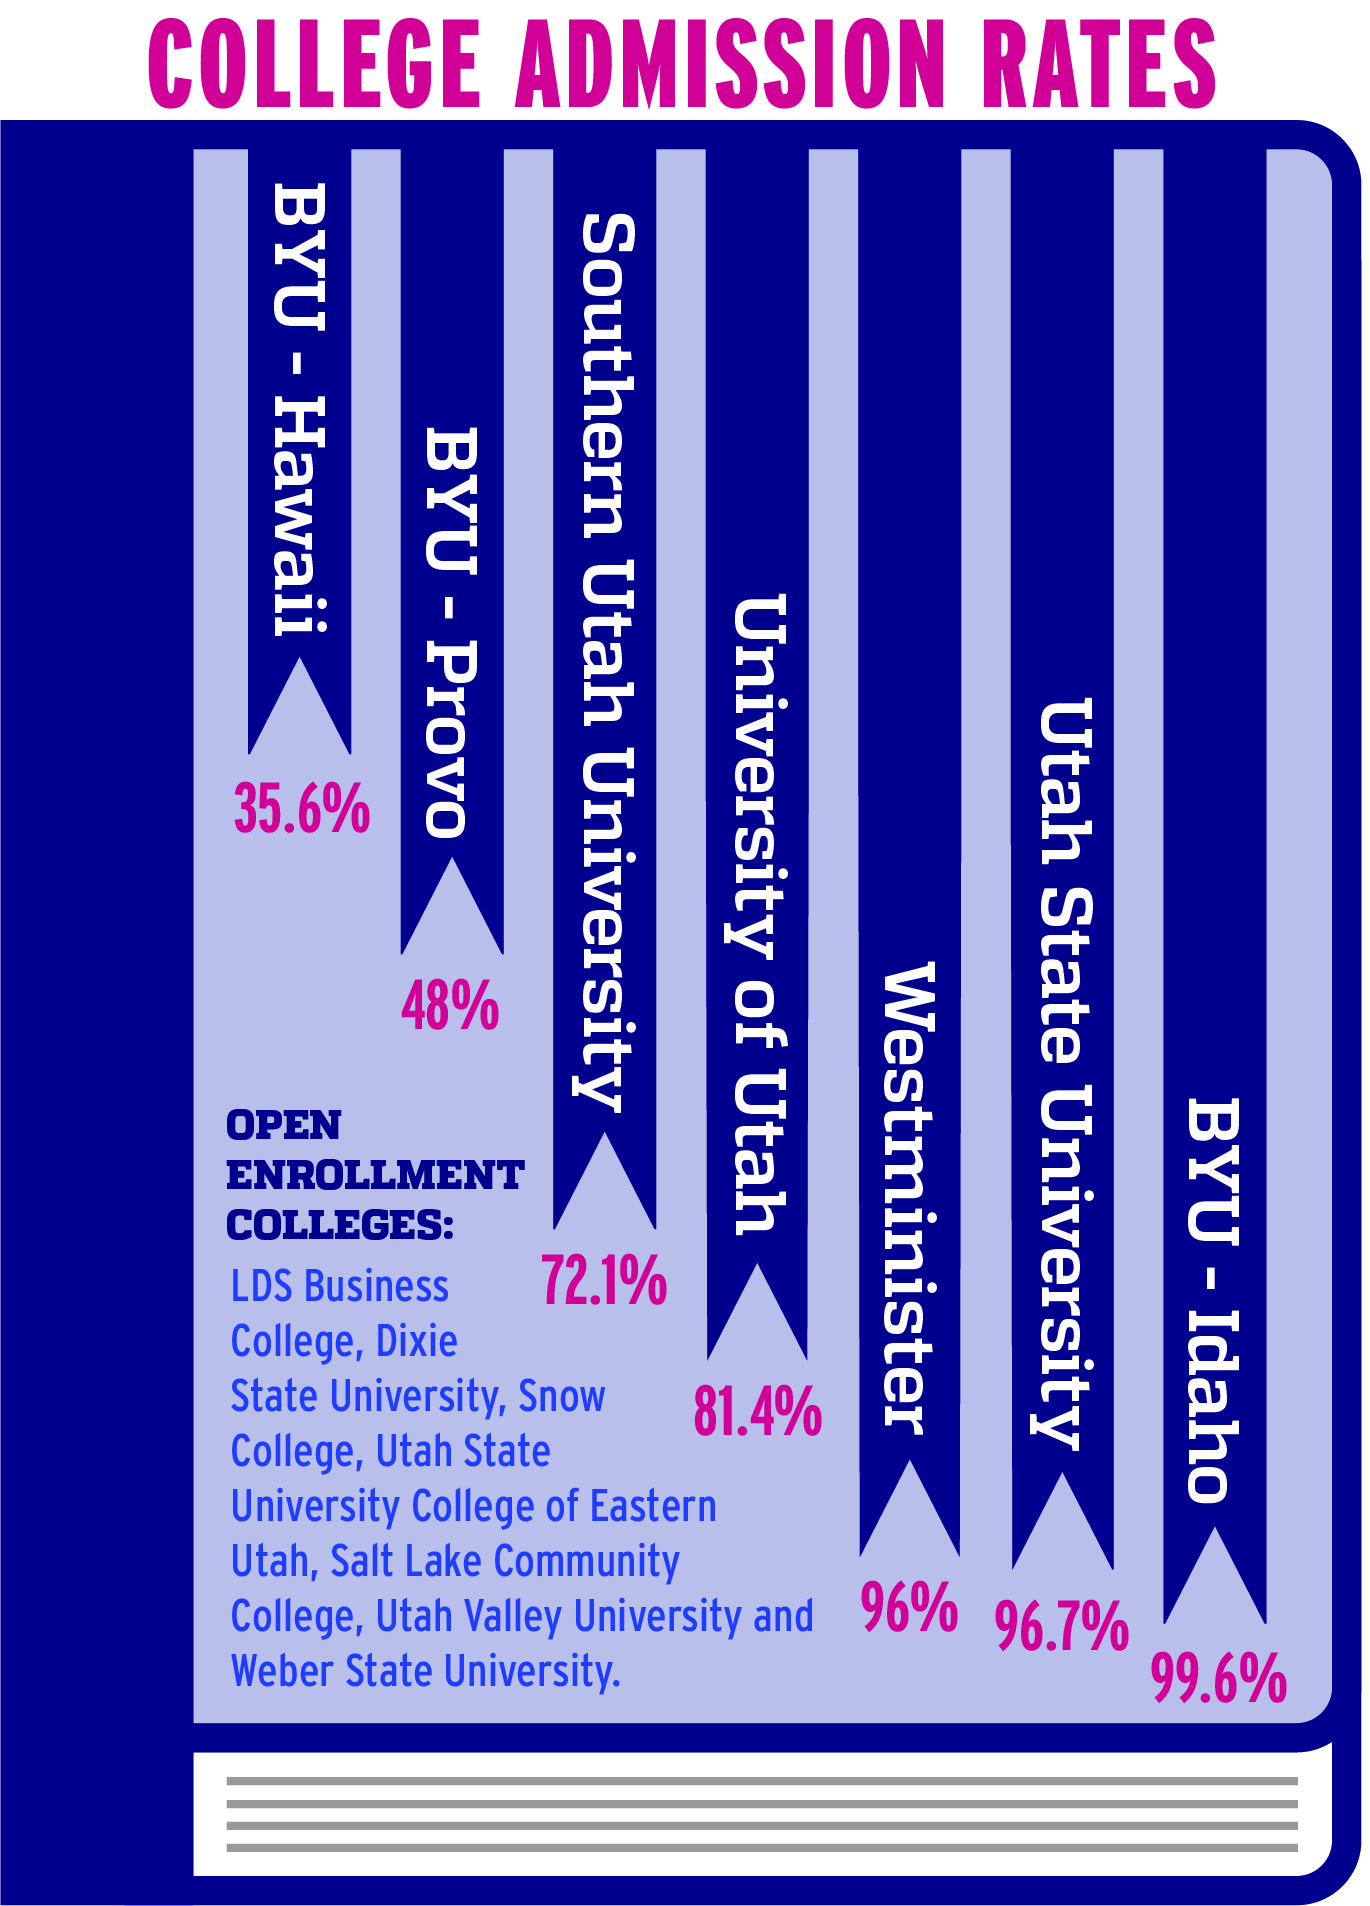 How BYU's admissions criteria compares to other church and Utah schools